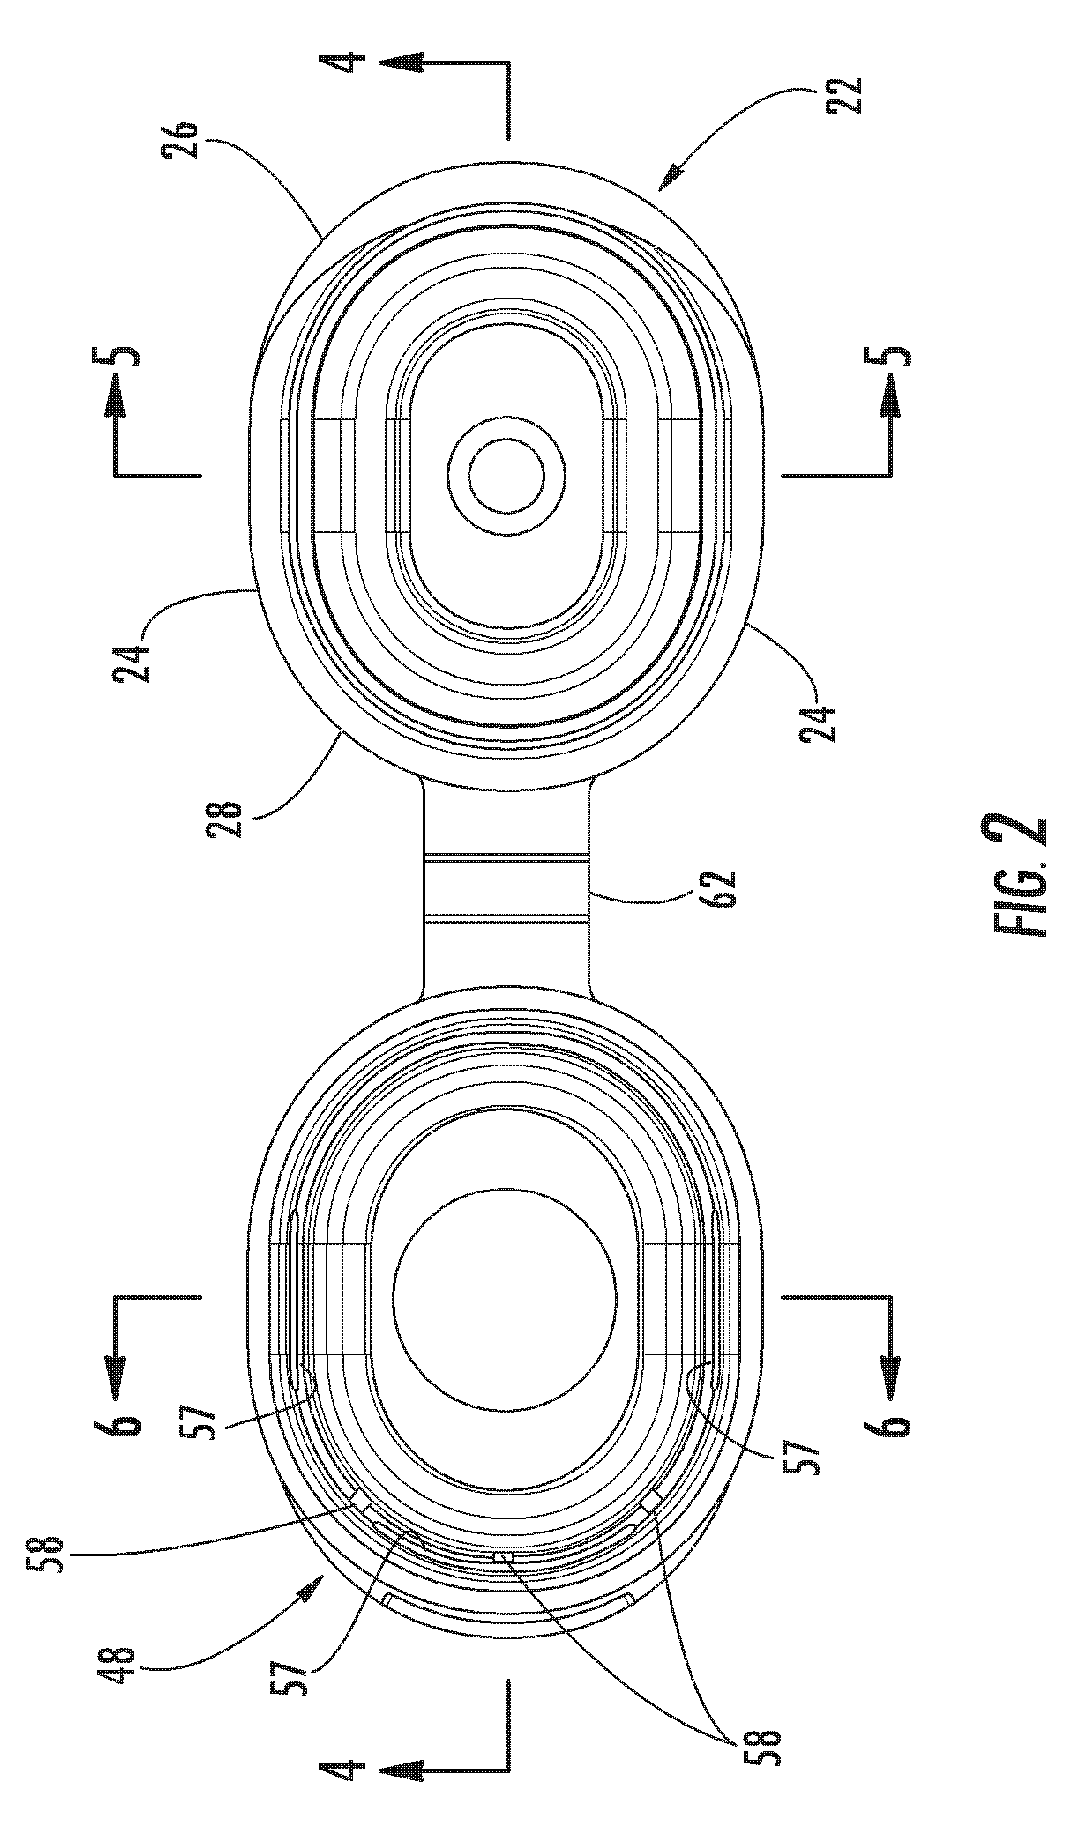 Vial with hinged cap and method of making same